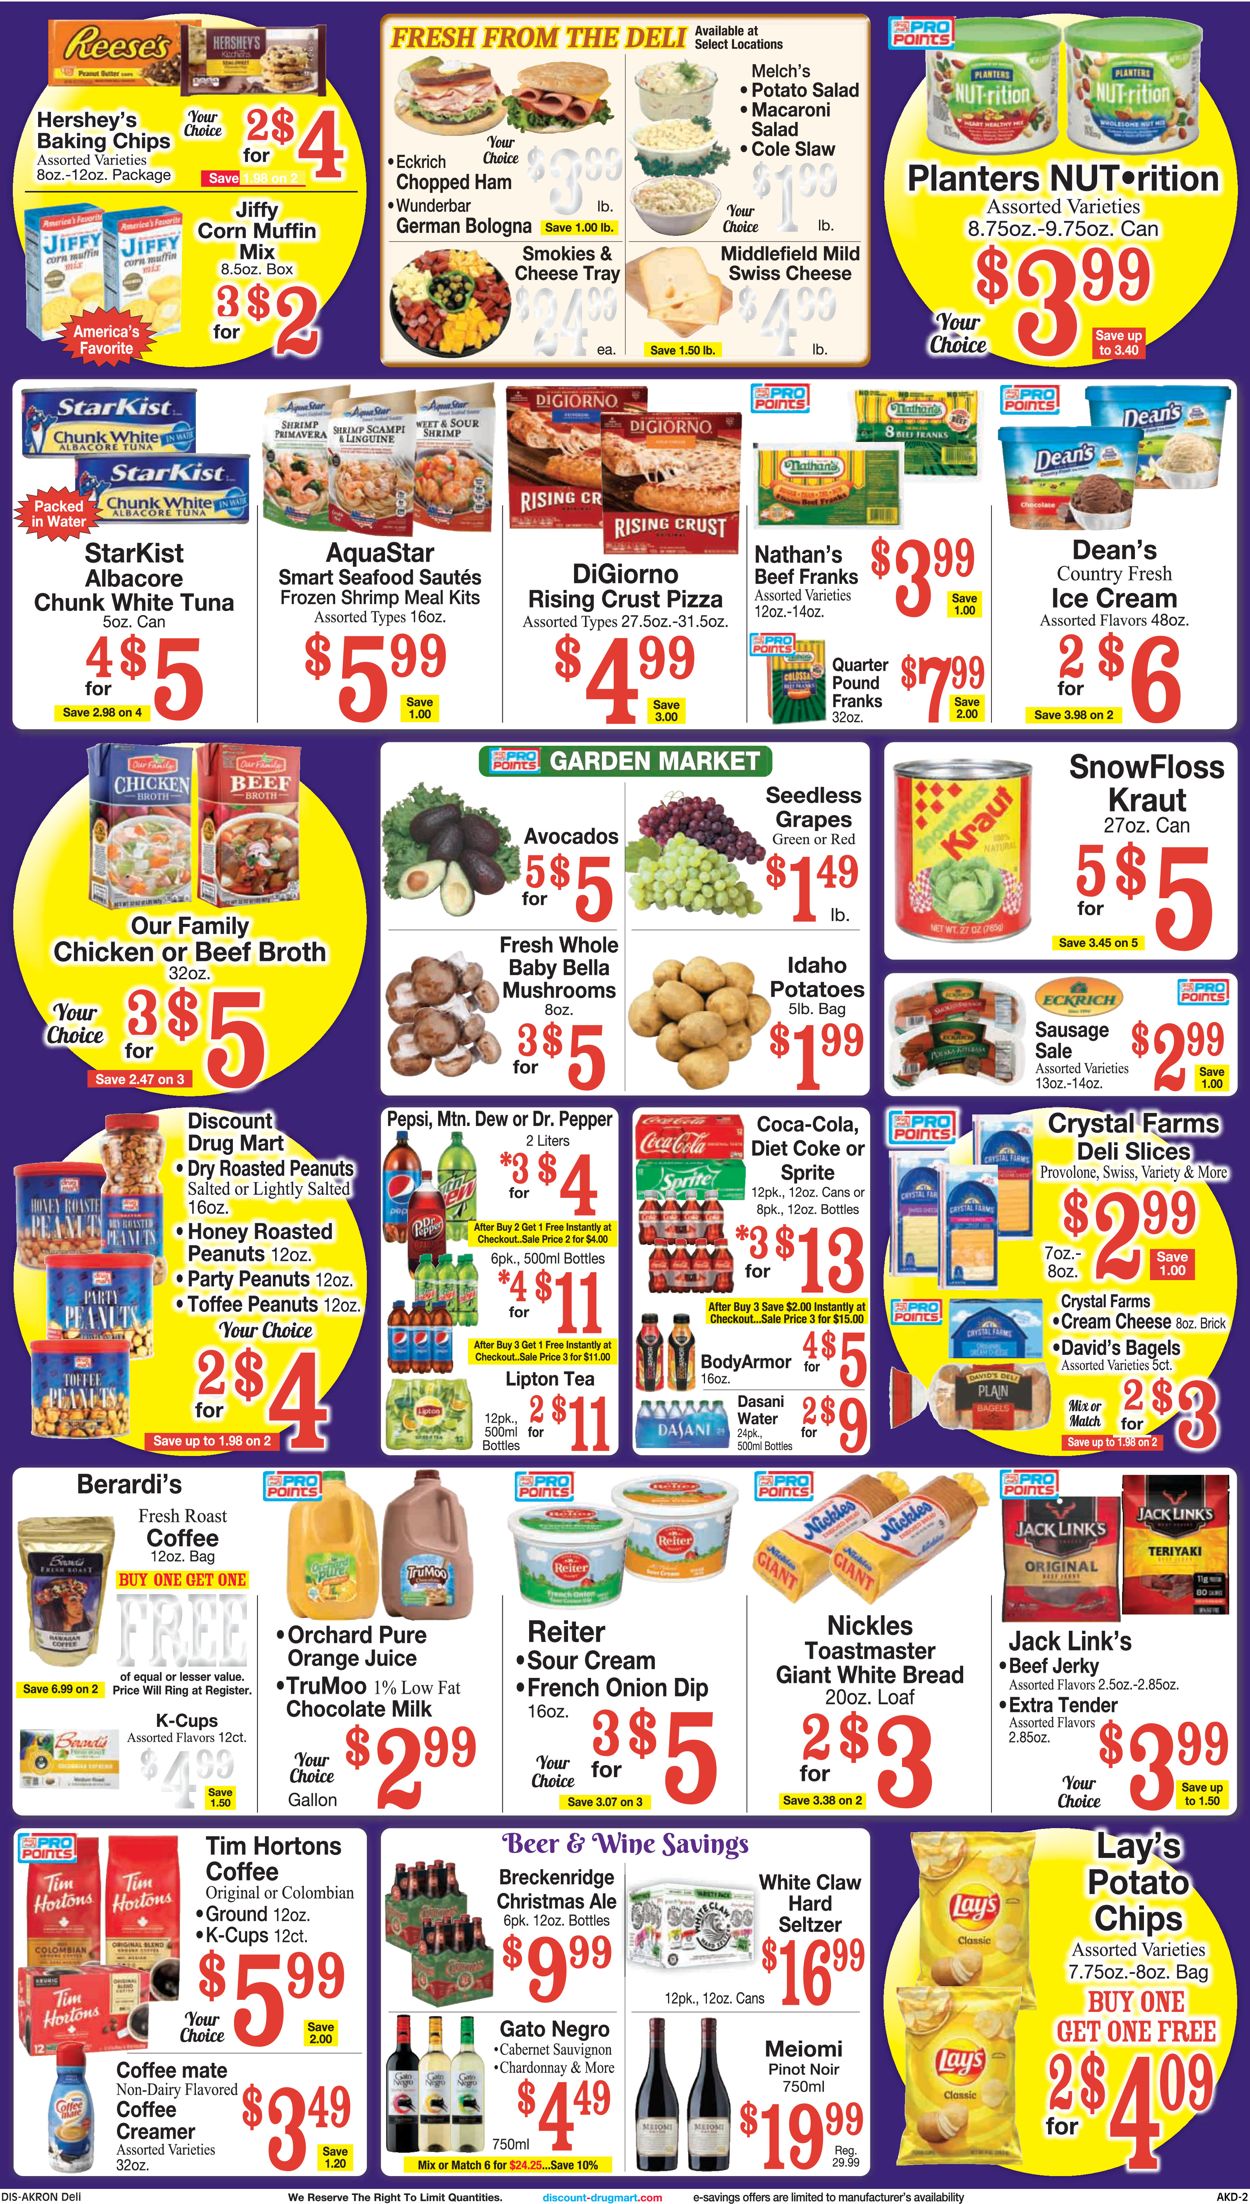 Catalogue Discount Drug Mart HALLOWEEN 2021 from 10/27/2021